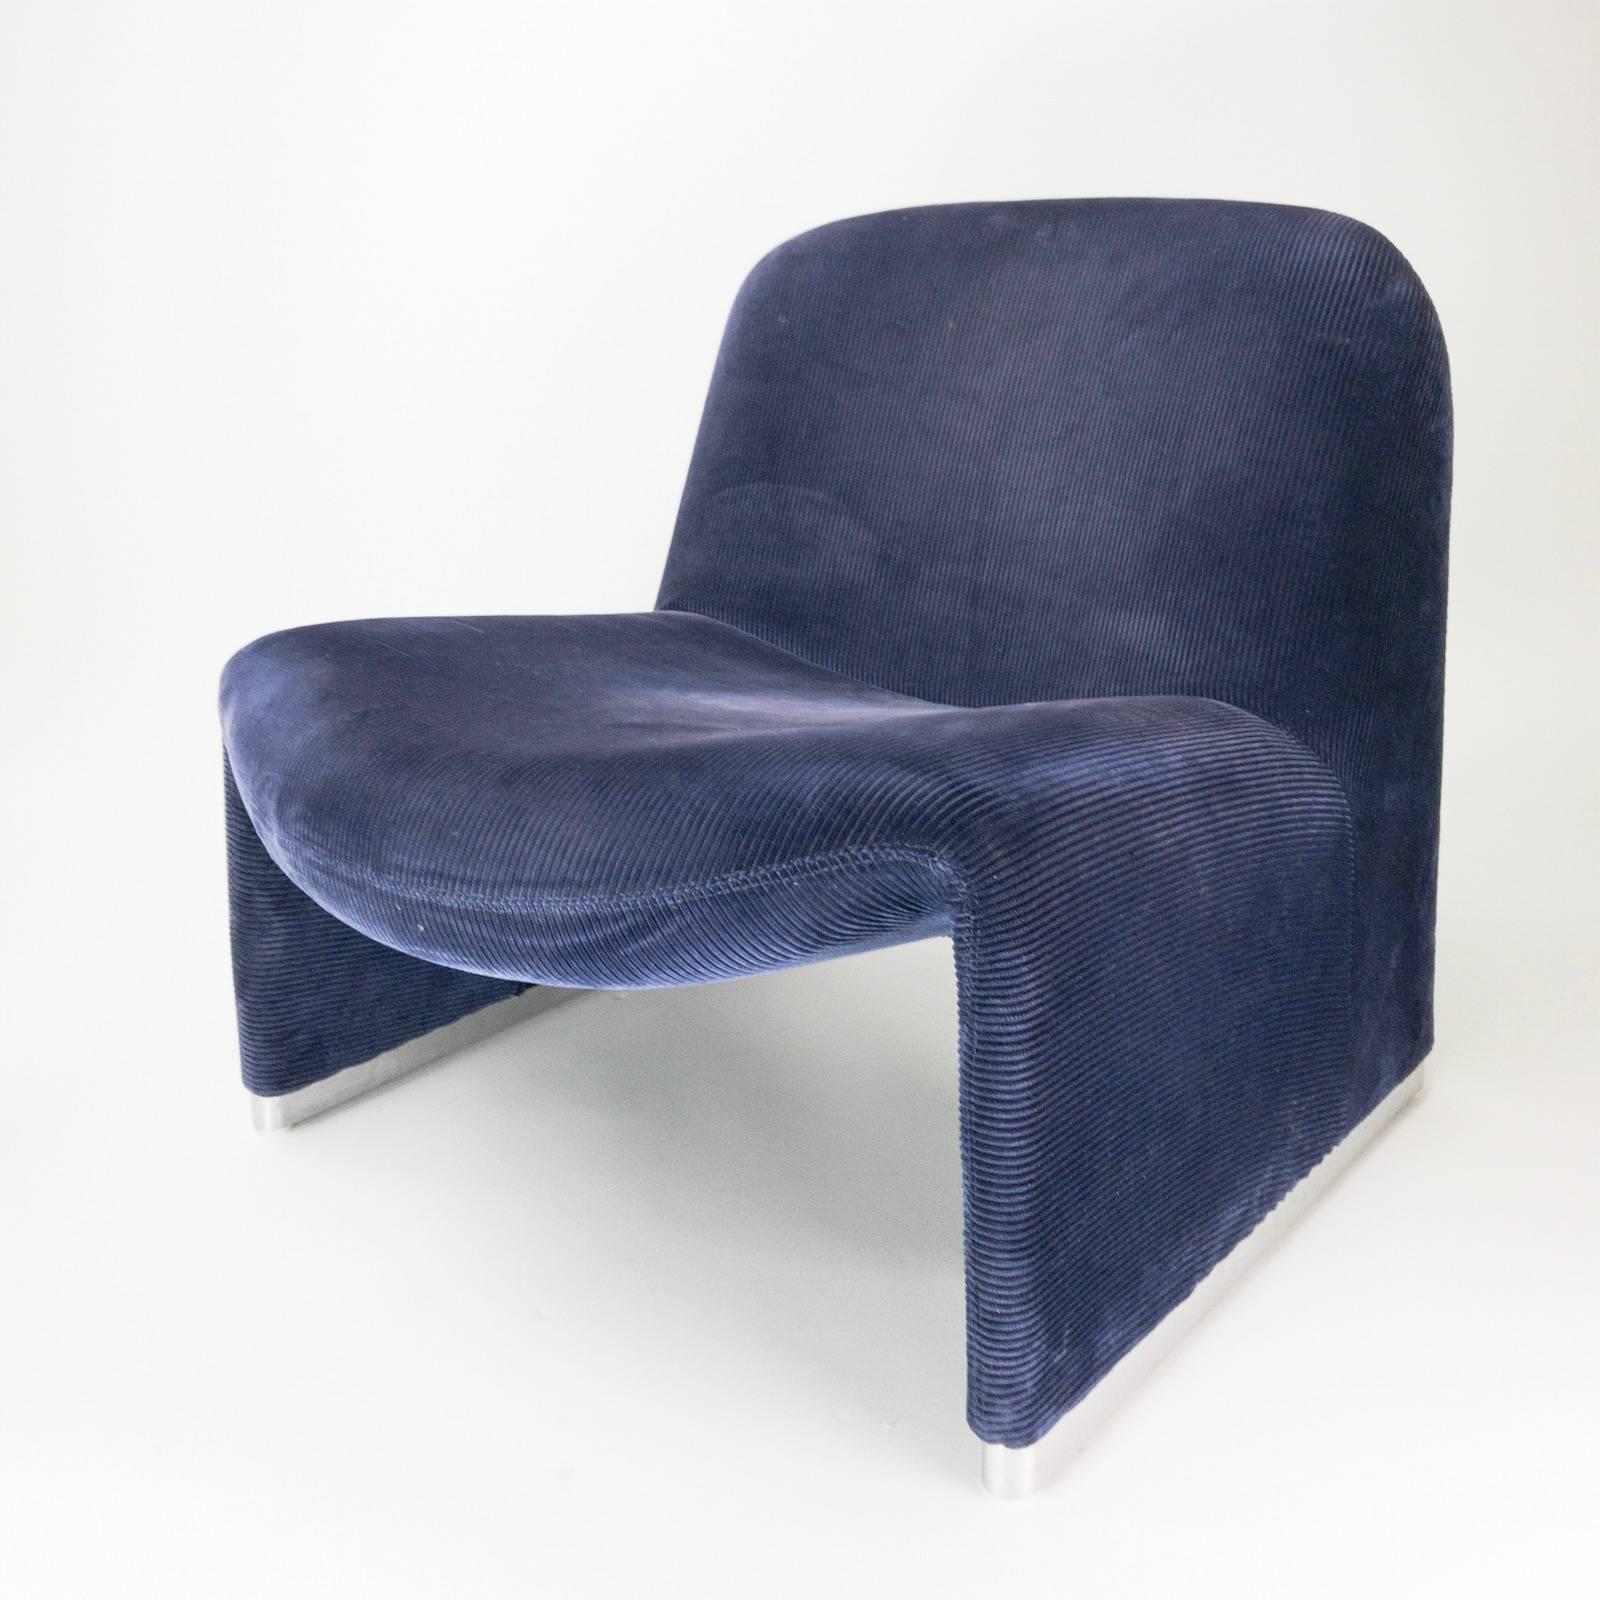 Navy blue corduroy Alky chairs by Gaincarlo Piretti for Castelli, 1970.

The chair is in stunning mint condition. The corduroy still has it´s deep blue color.

Size: 70 cm high, 75 cm deep and seat height of 37 cm.